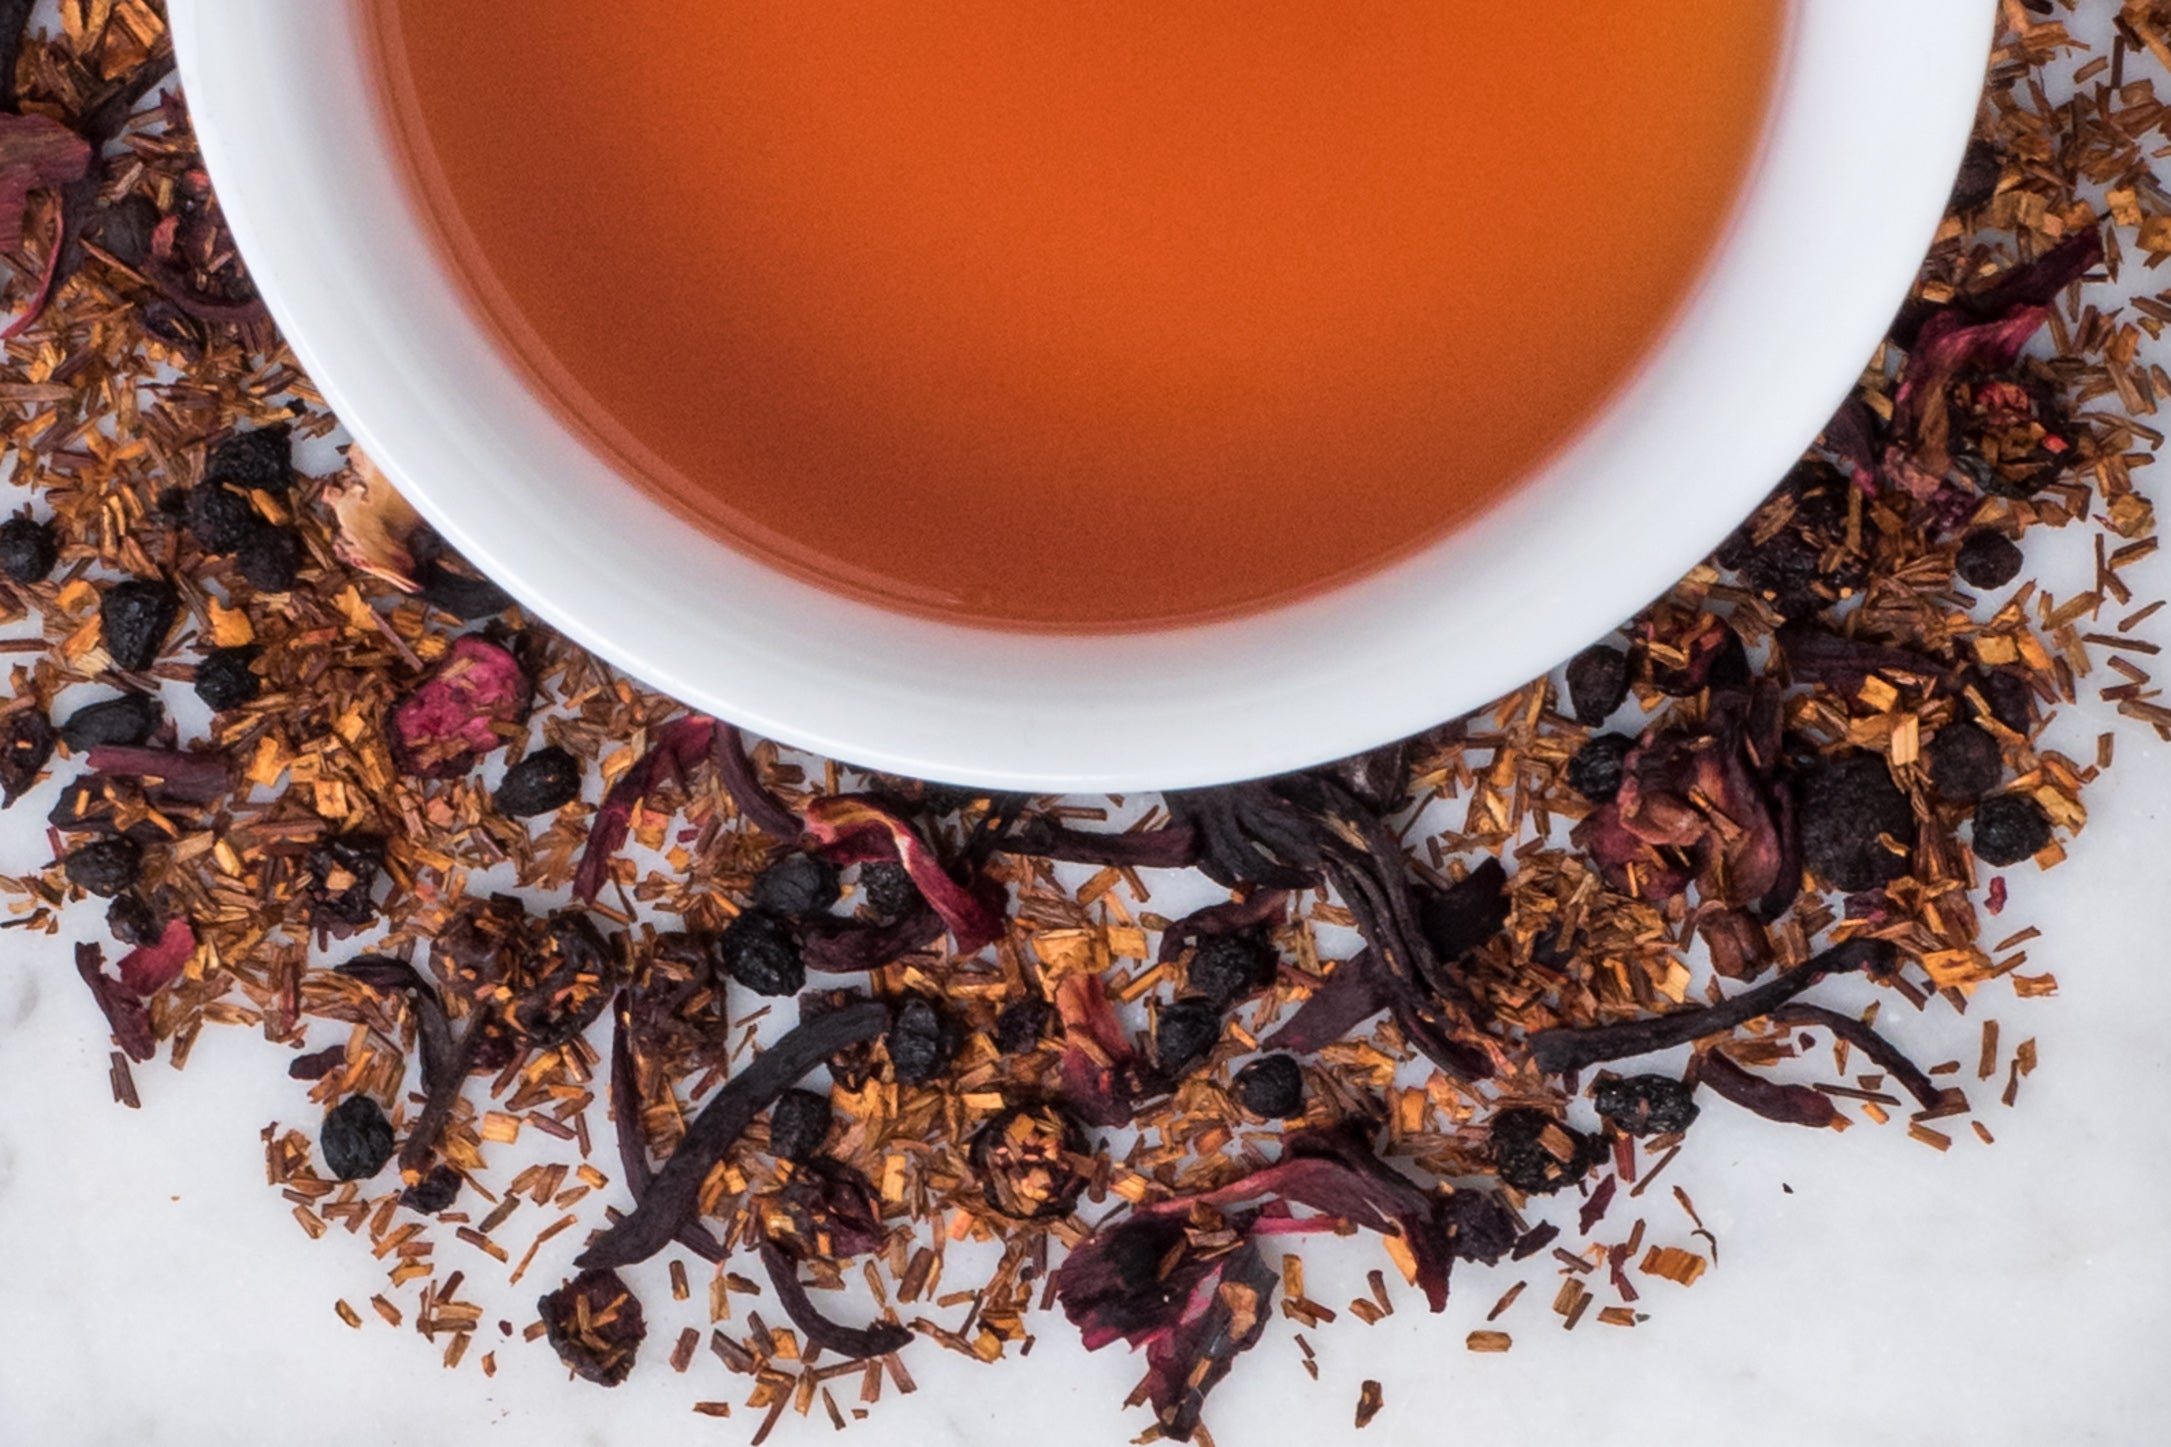 Broadway Berry blueberry and schisandra berry rooibos herbal tea surrounding white cup with brewed tea